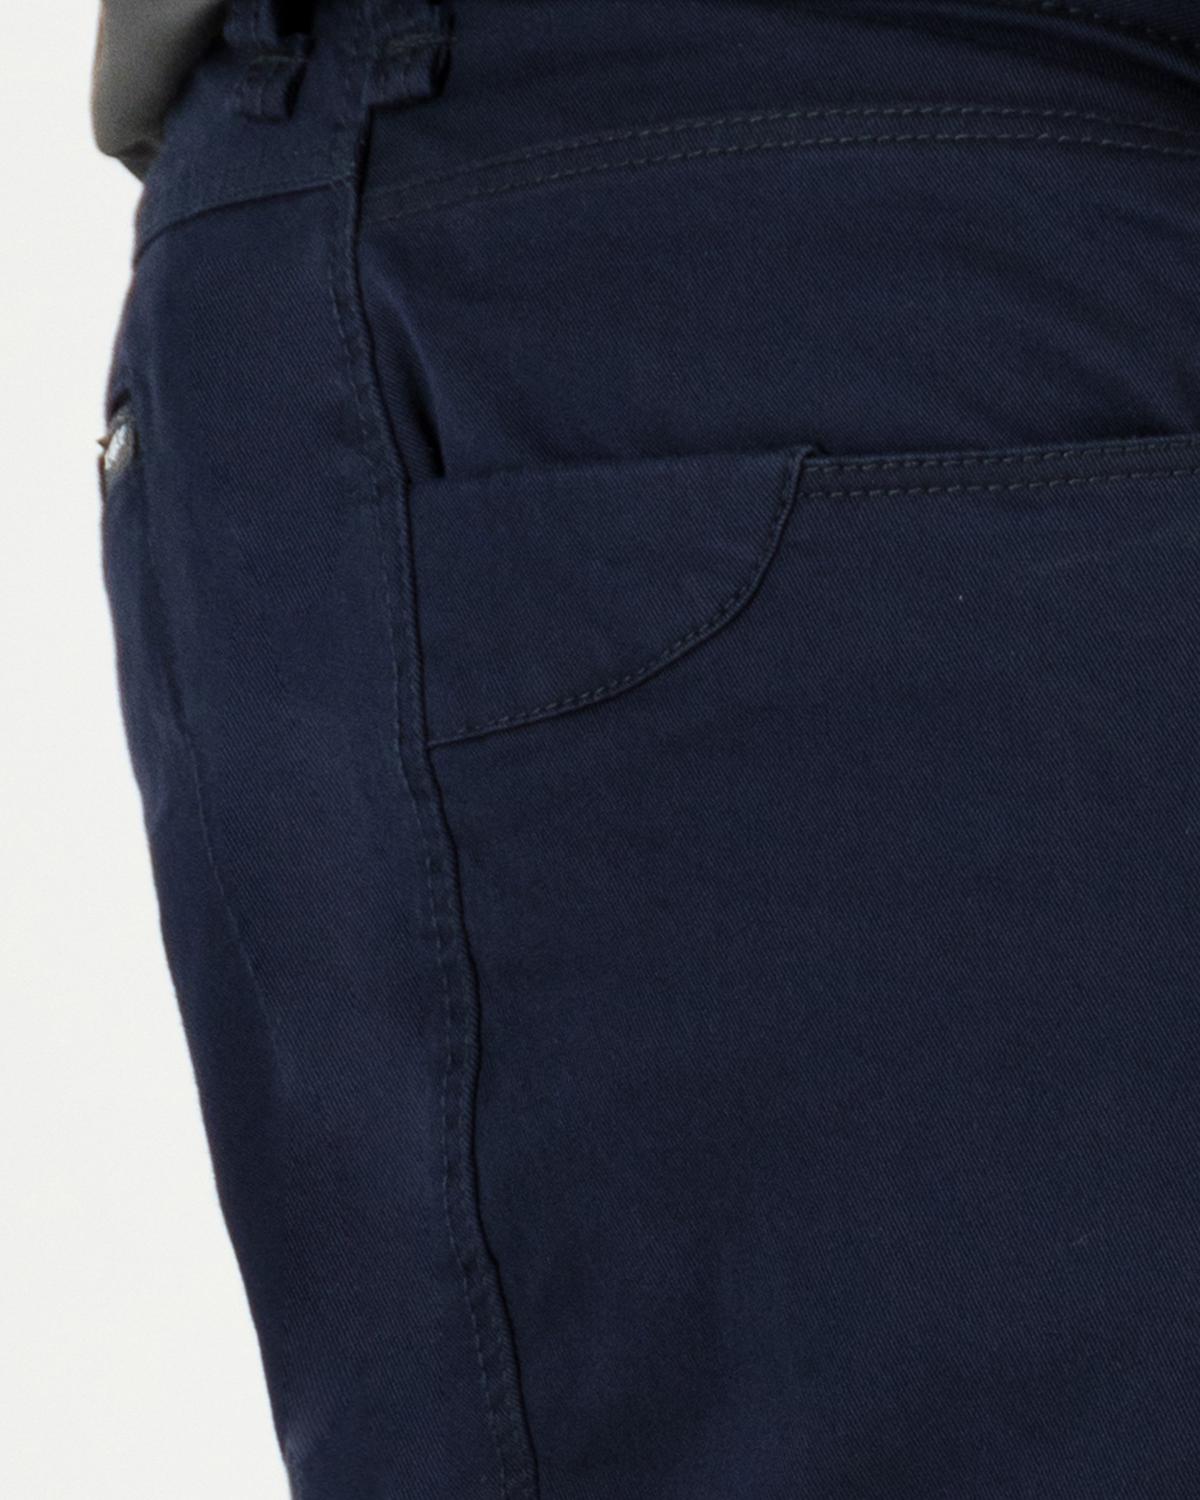 K-Way Elements Men’s Travel Chinos Extended Sizes -  Navy